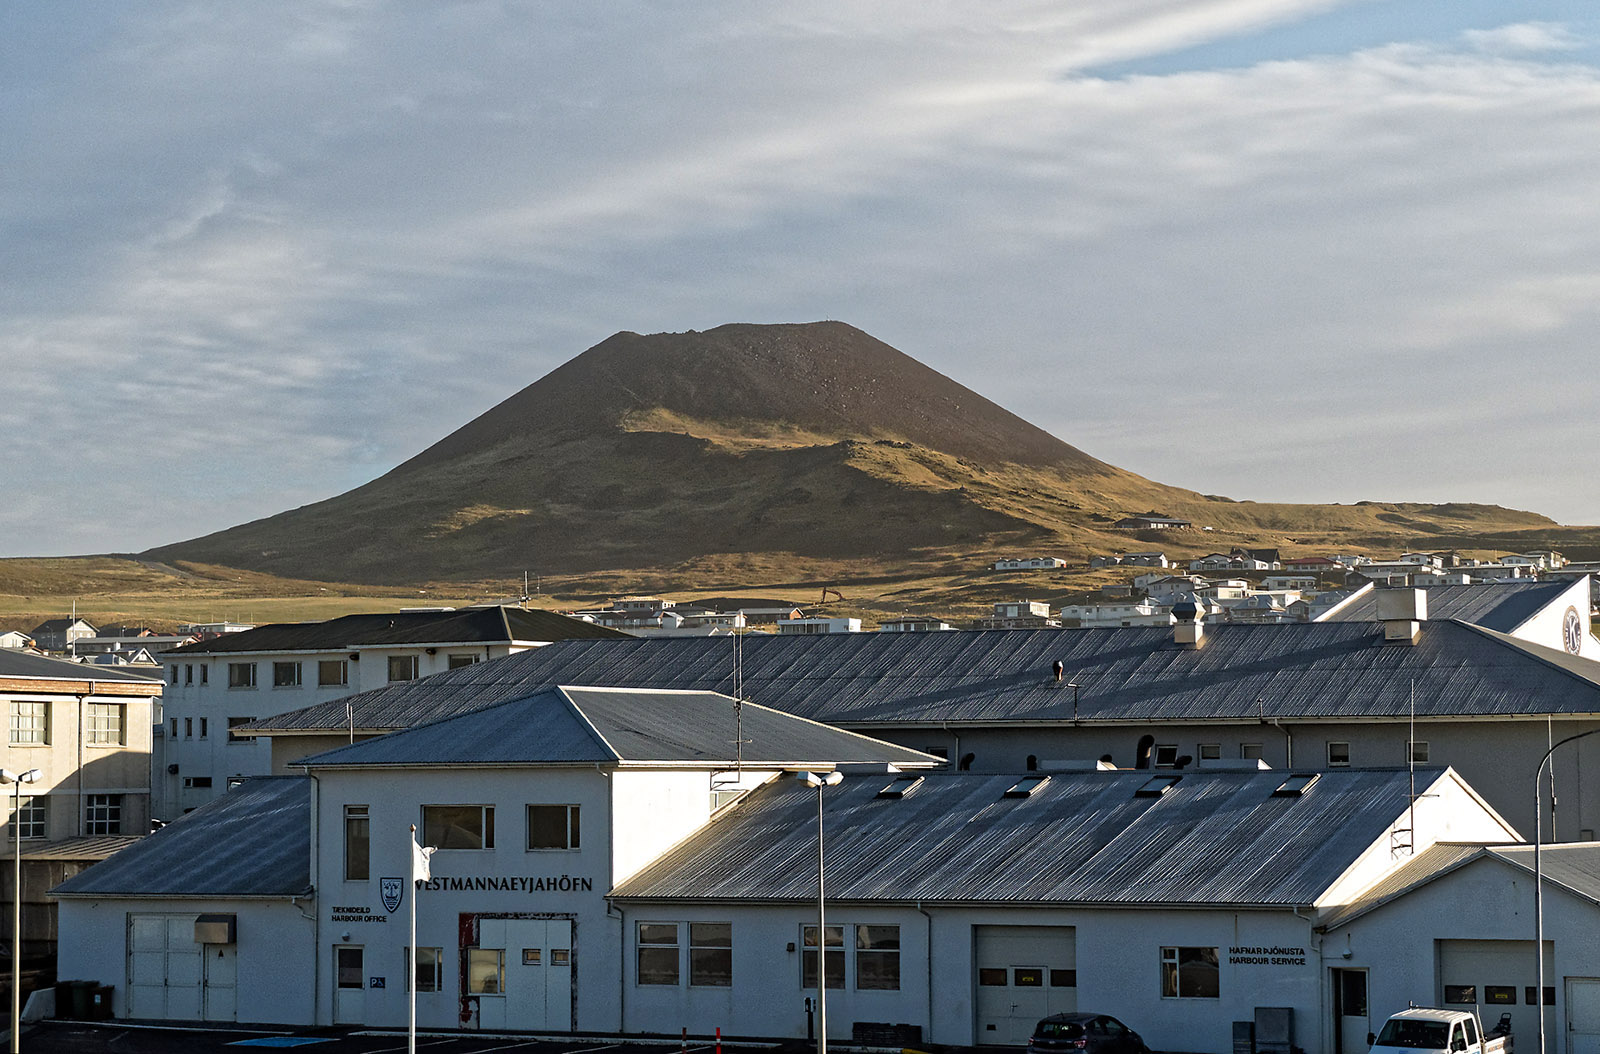 Eldfell is visible above the harbor buildings at Vestmannaeyjabaer. Eldfell is a volcano that was newly formed by an eruption in 1973 that forced the evacuation of the island and destroyed over 400 homes.